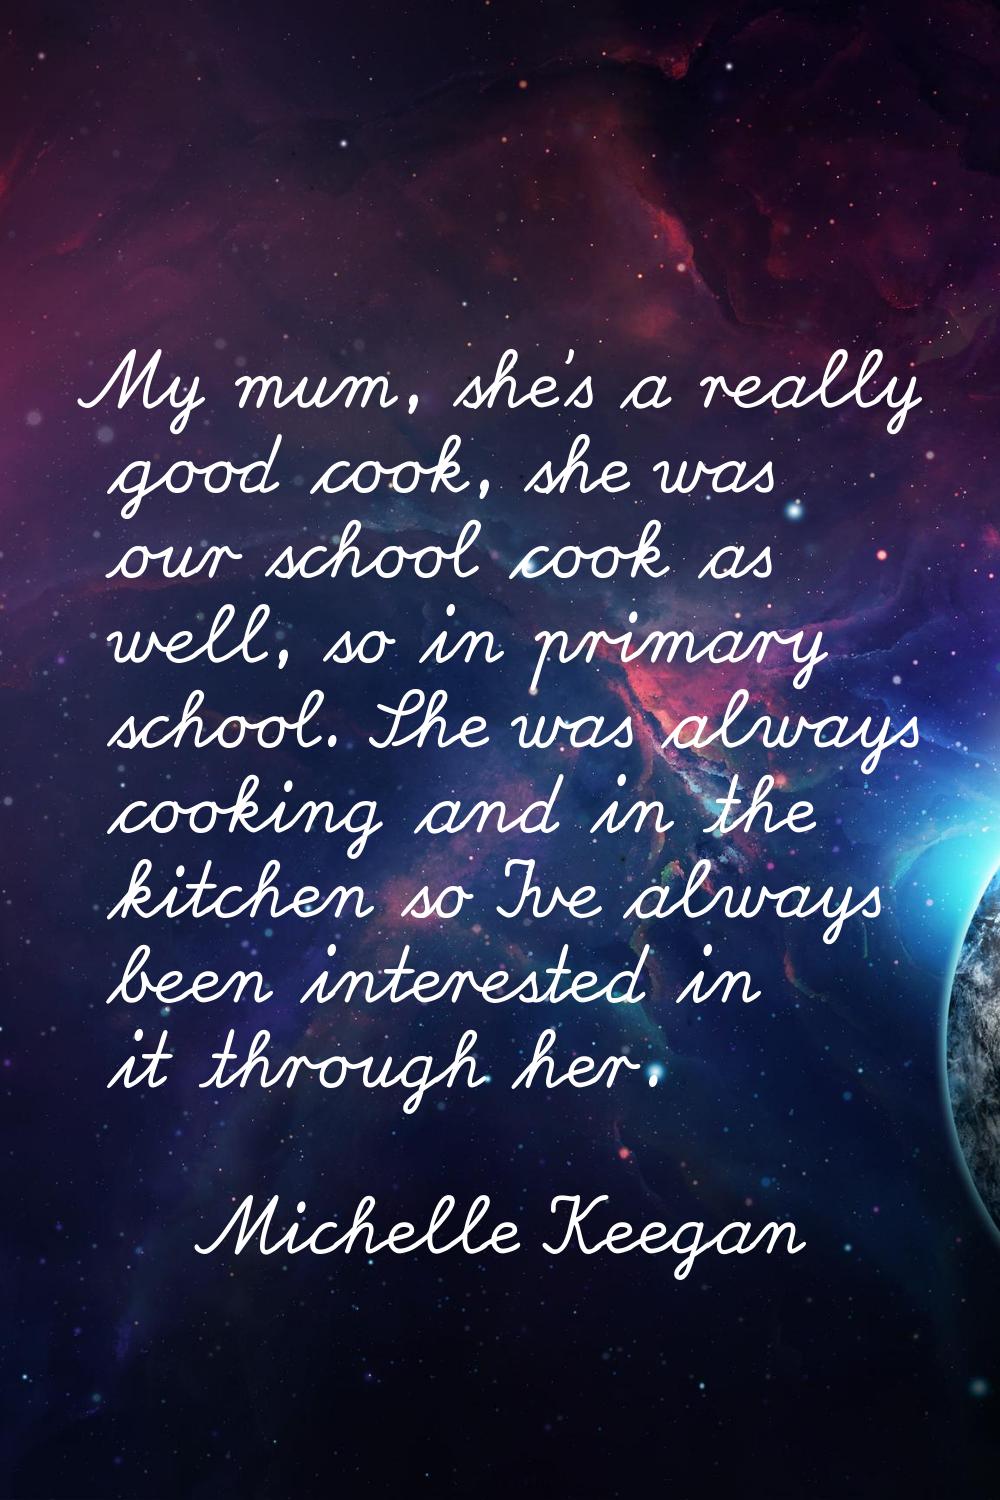 My mum, she's a really good cook, she was our school cook as well, so in primary school. She was al